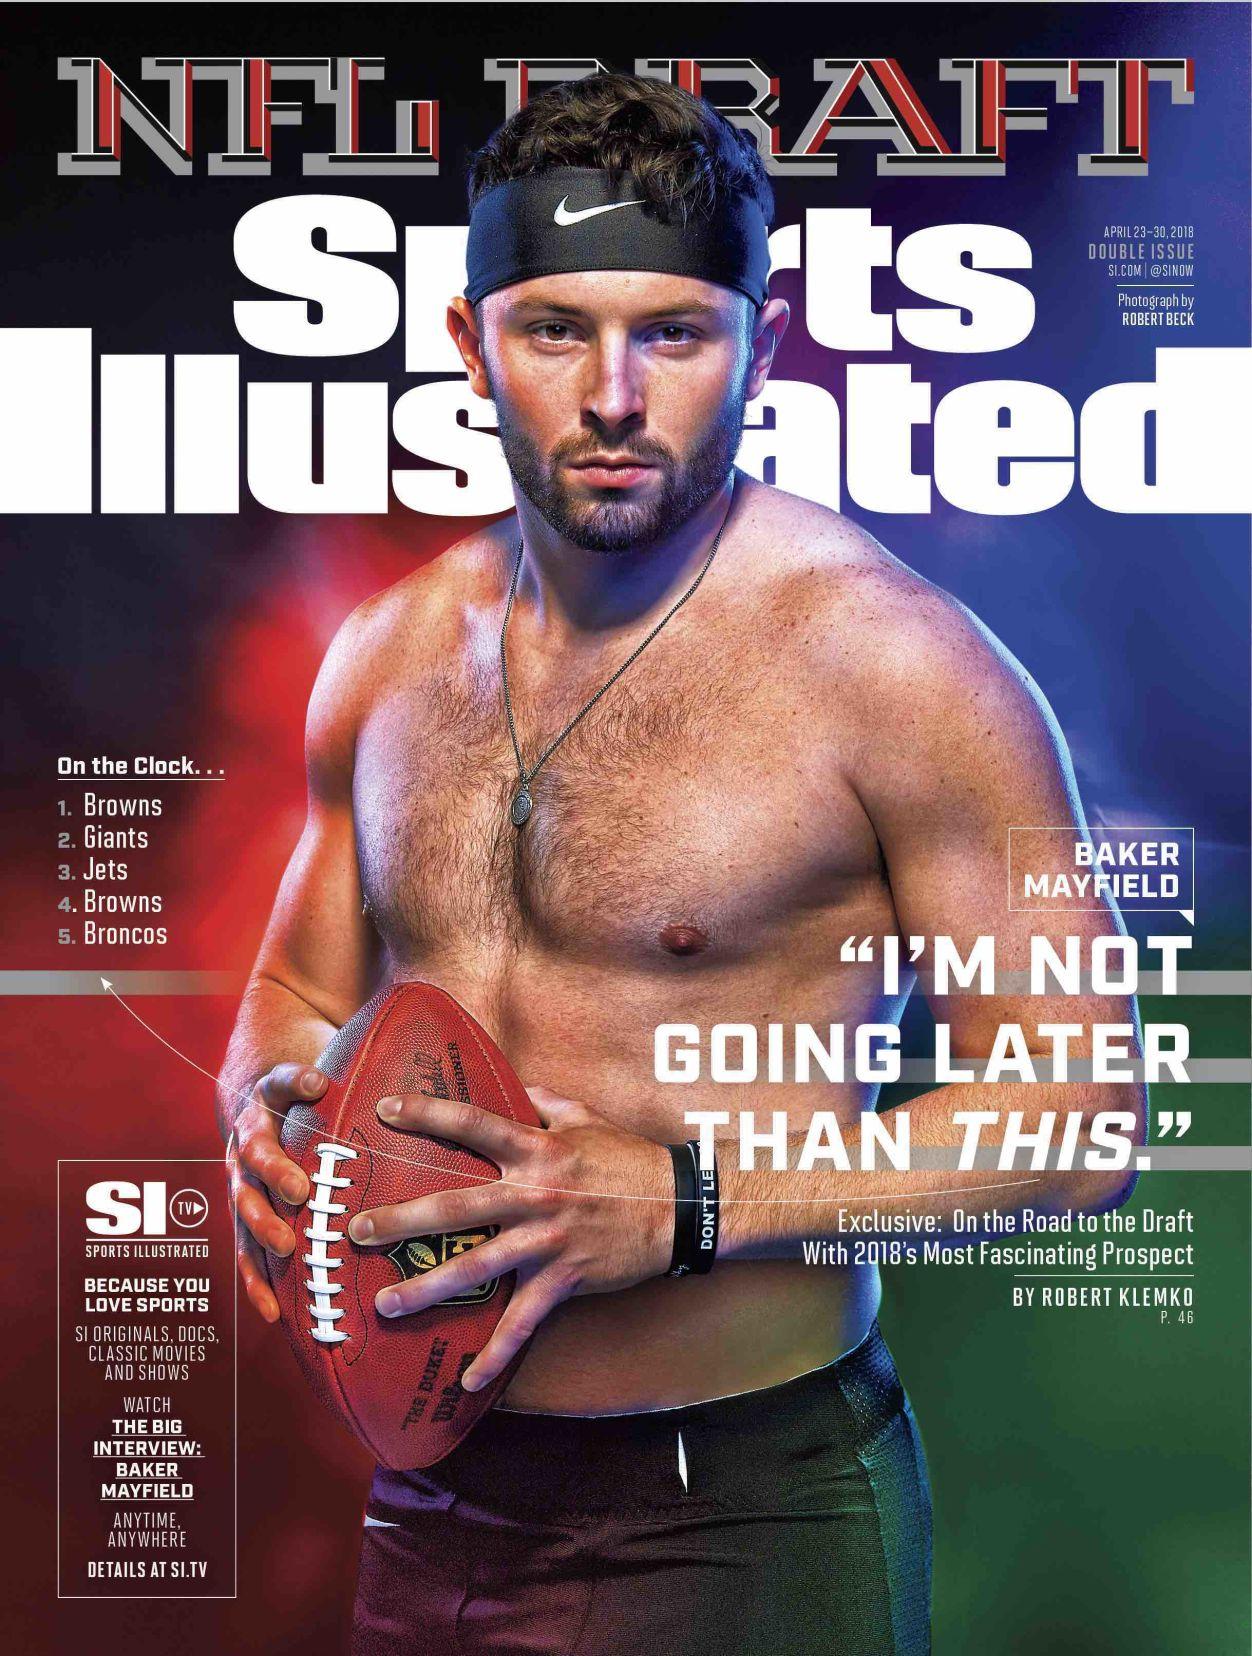 Baker Mayfield appears shirtless on cover of Sports Illustrated